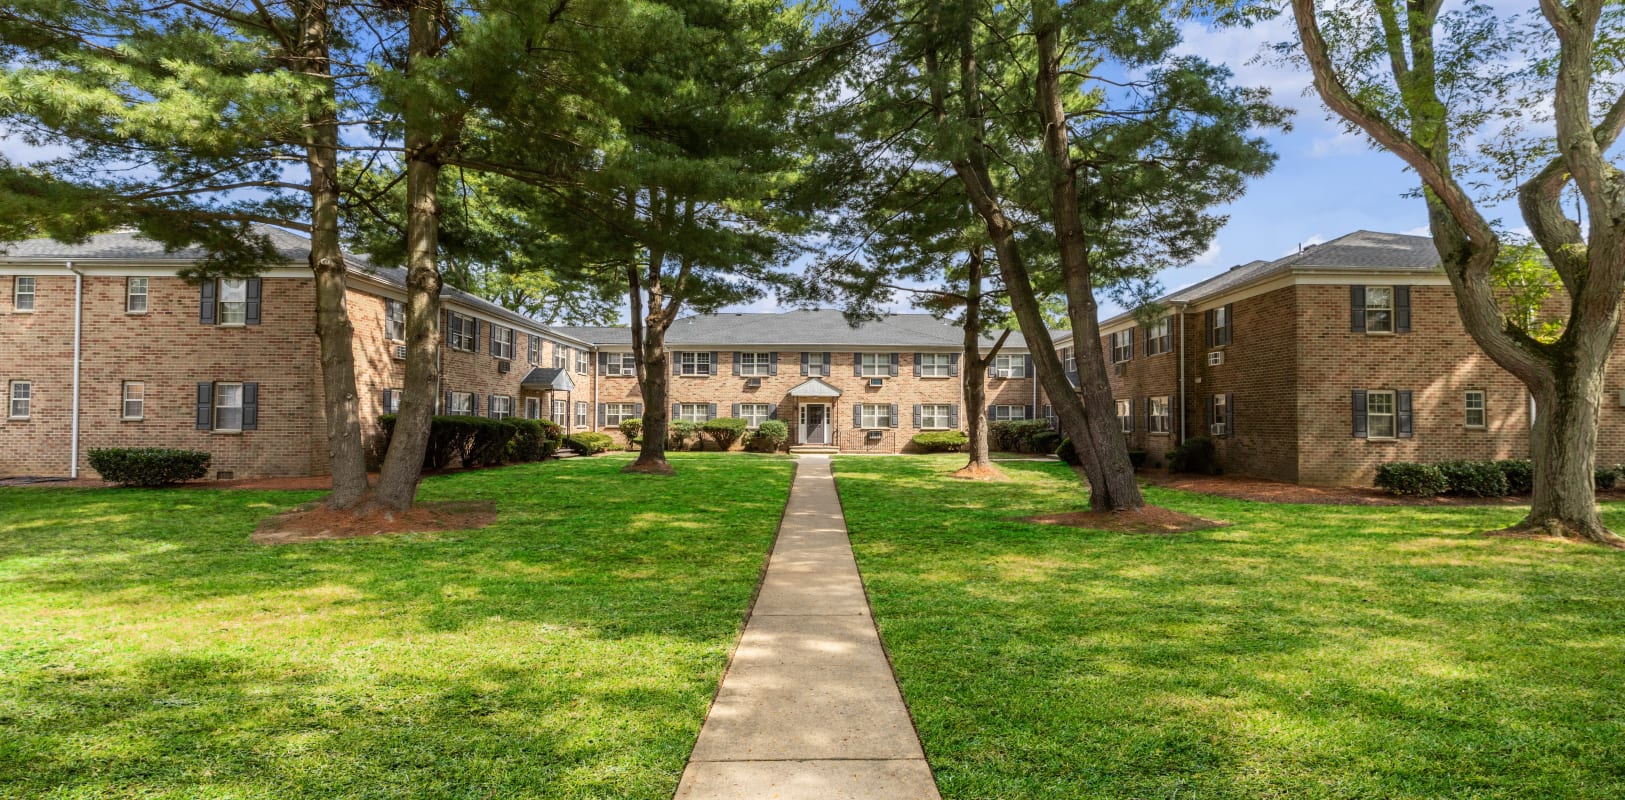 Walking Paths at Sharon Arms Apartments in Robbinsville, New Jersey